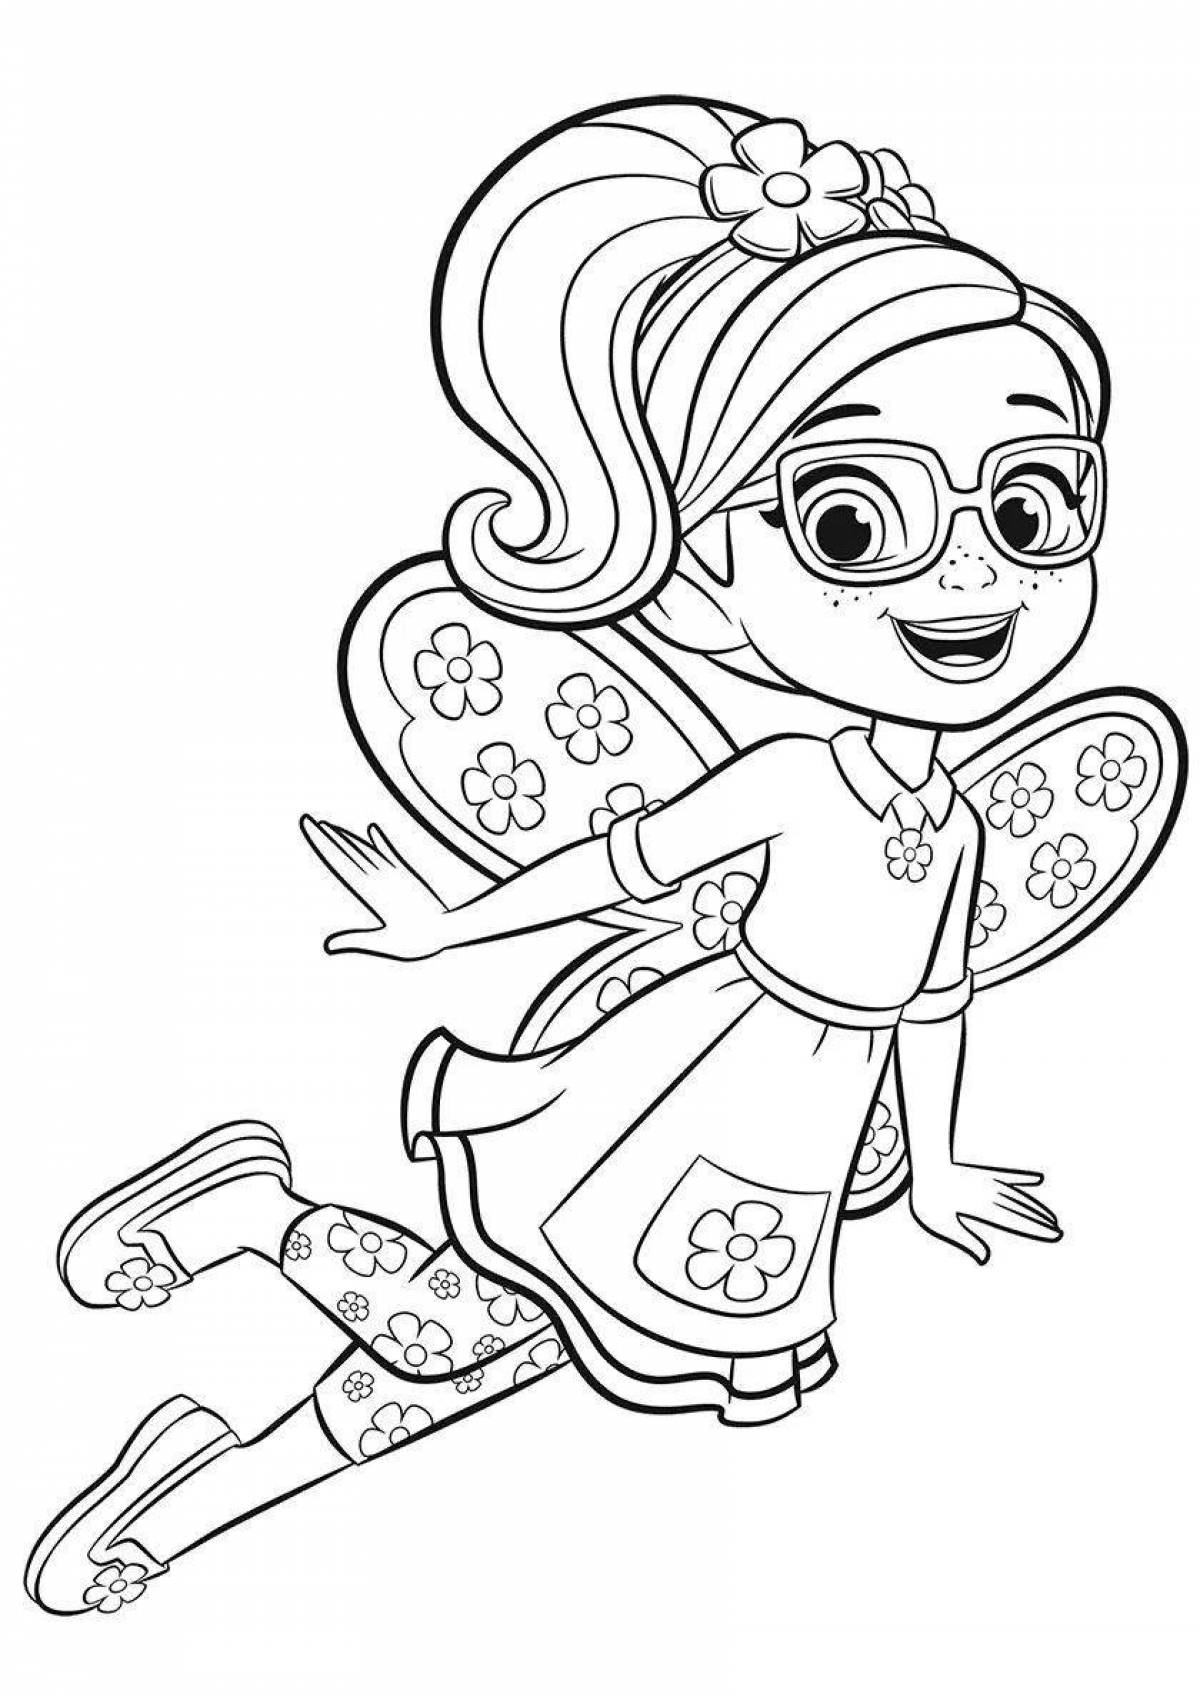 Fancy cafe butterbean coloring page